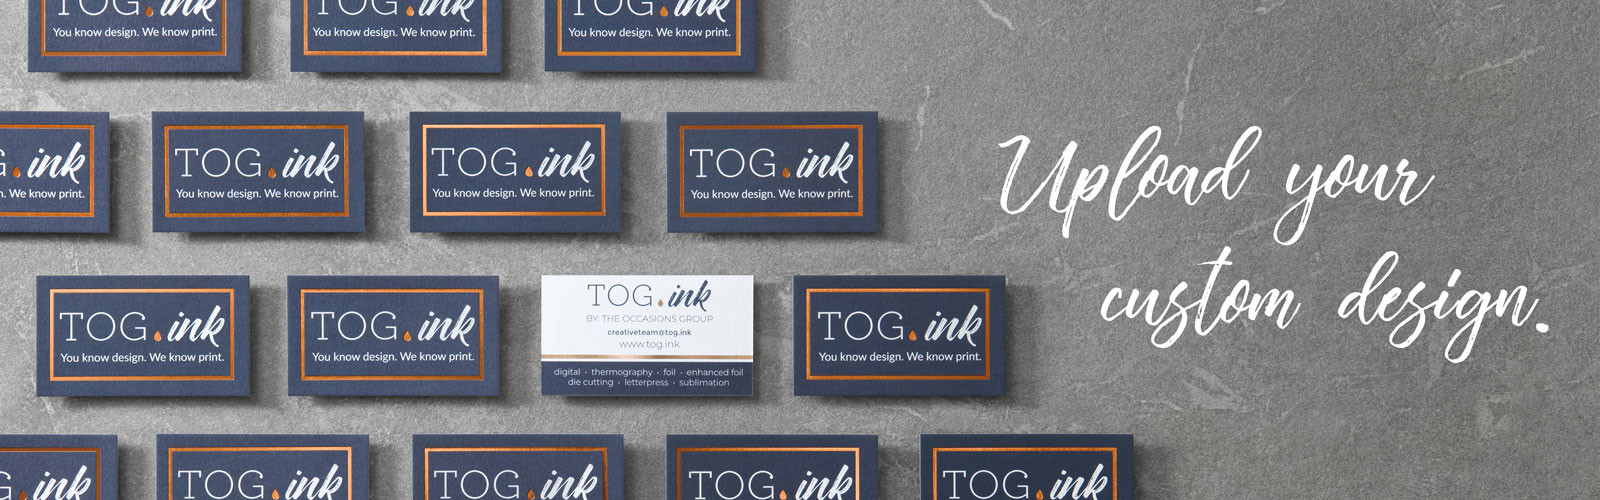 business cards banner